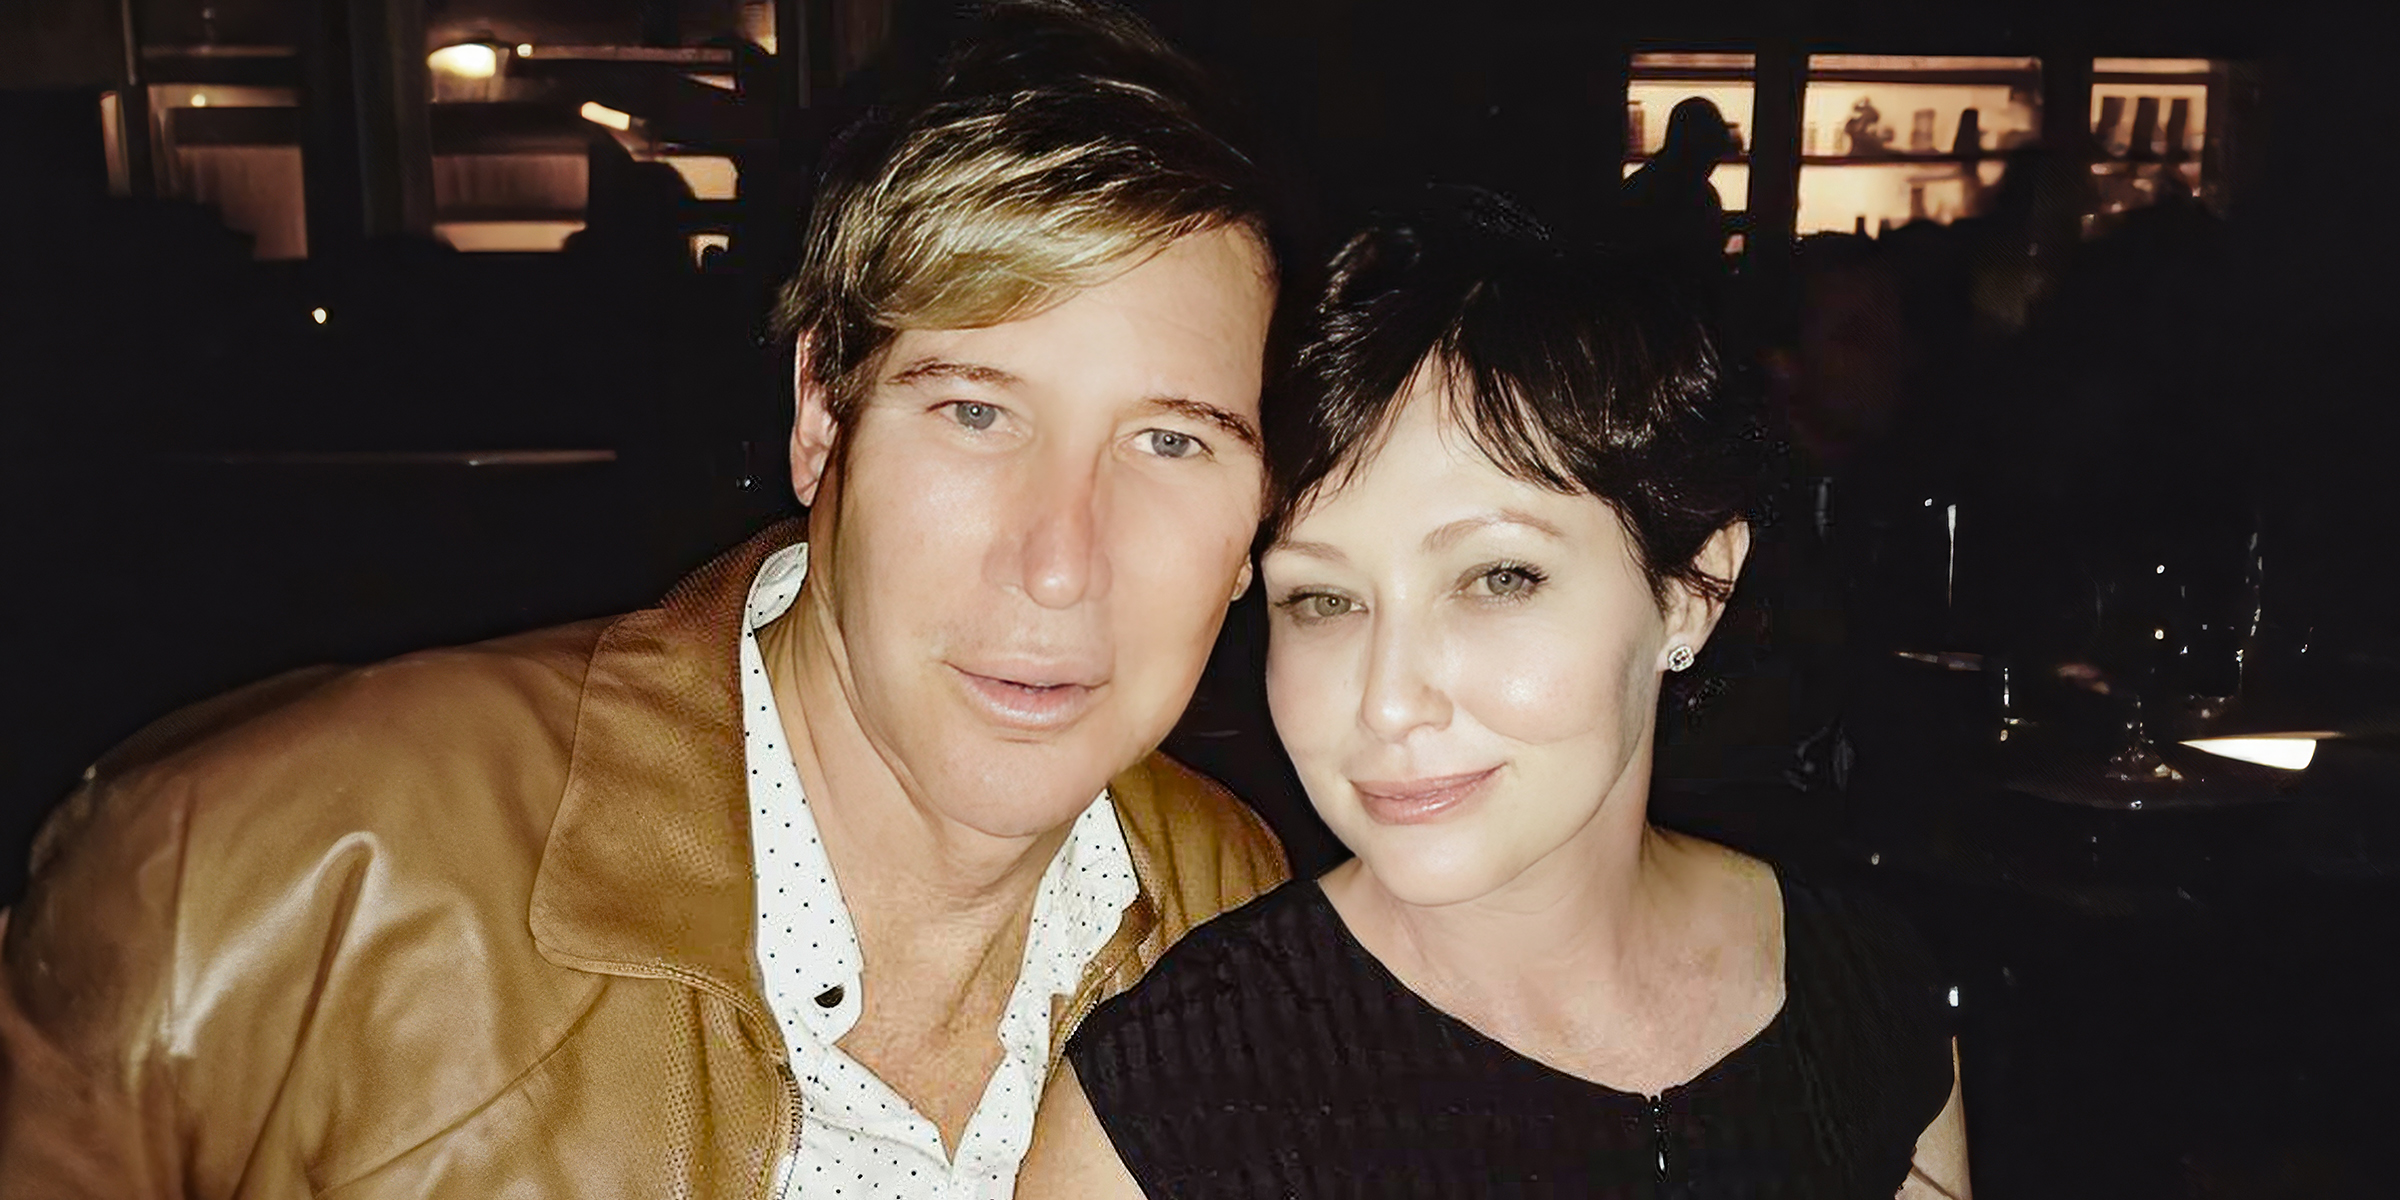 Dr. Lawrence Piro and Shannen Doherty | Source: Instagram/theshando